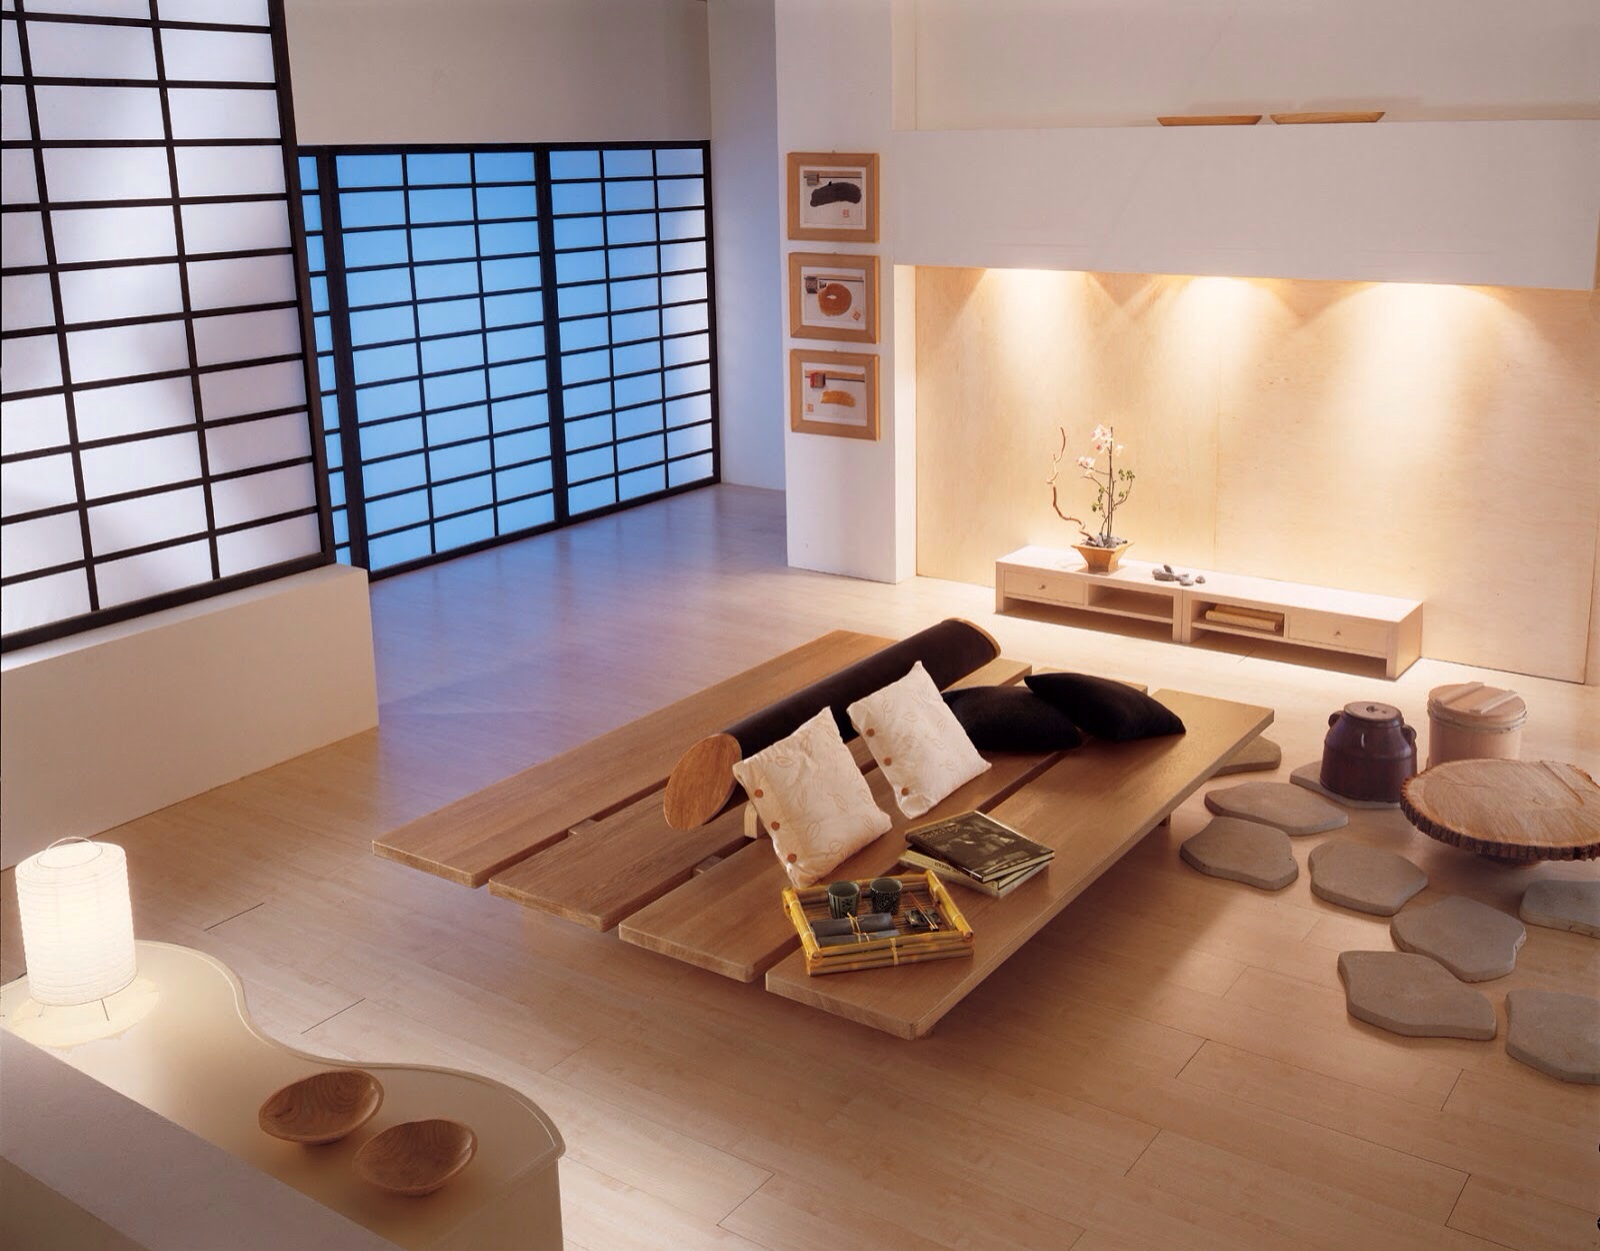 Minimalist Zen Living Room: A Peaceful World Within